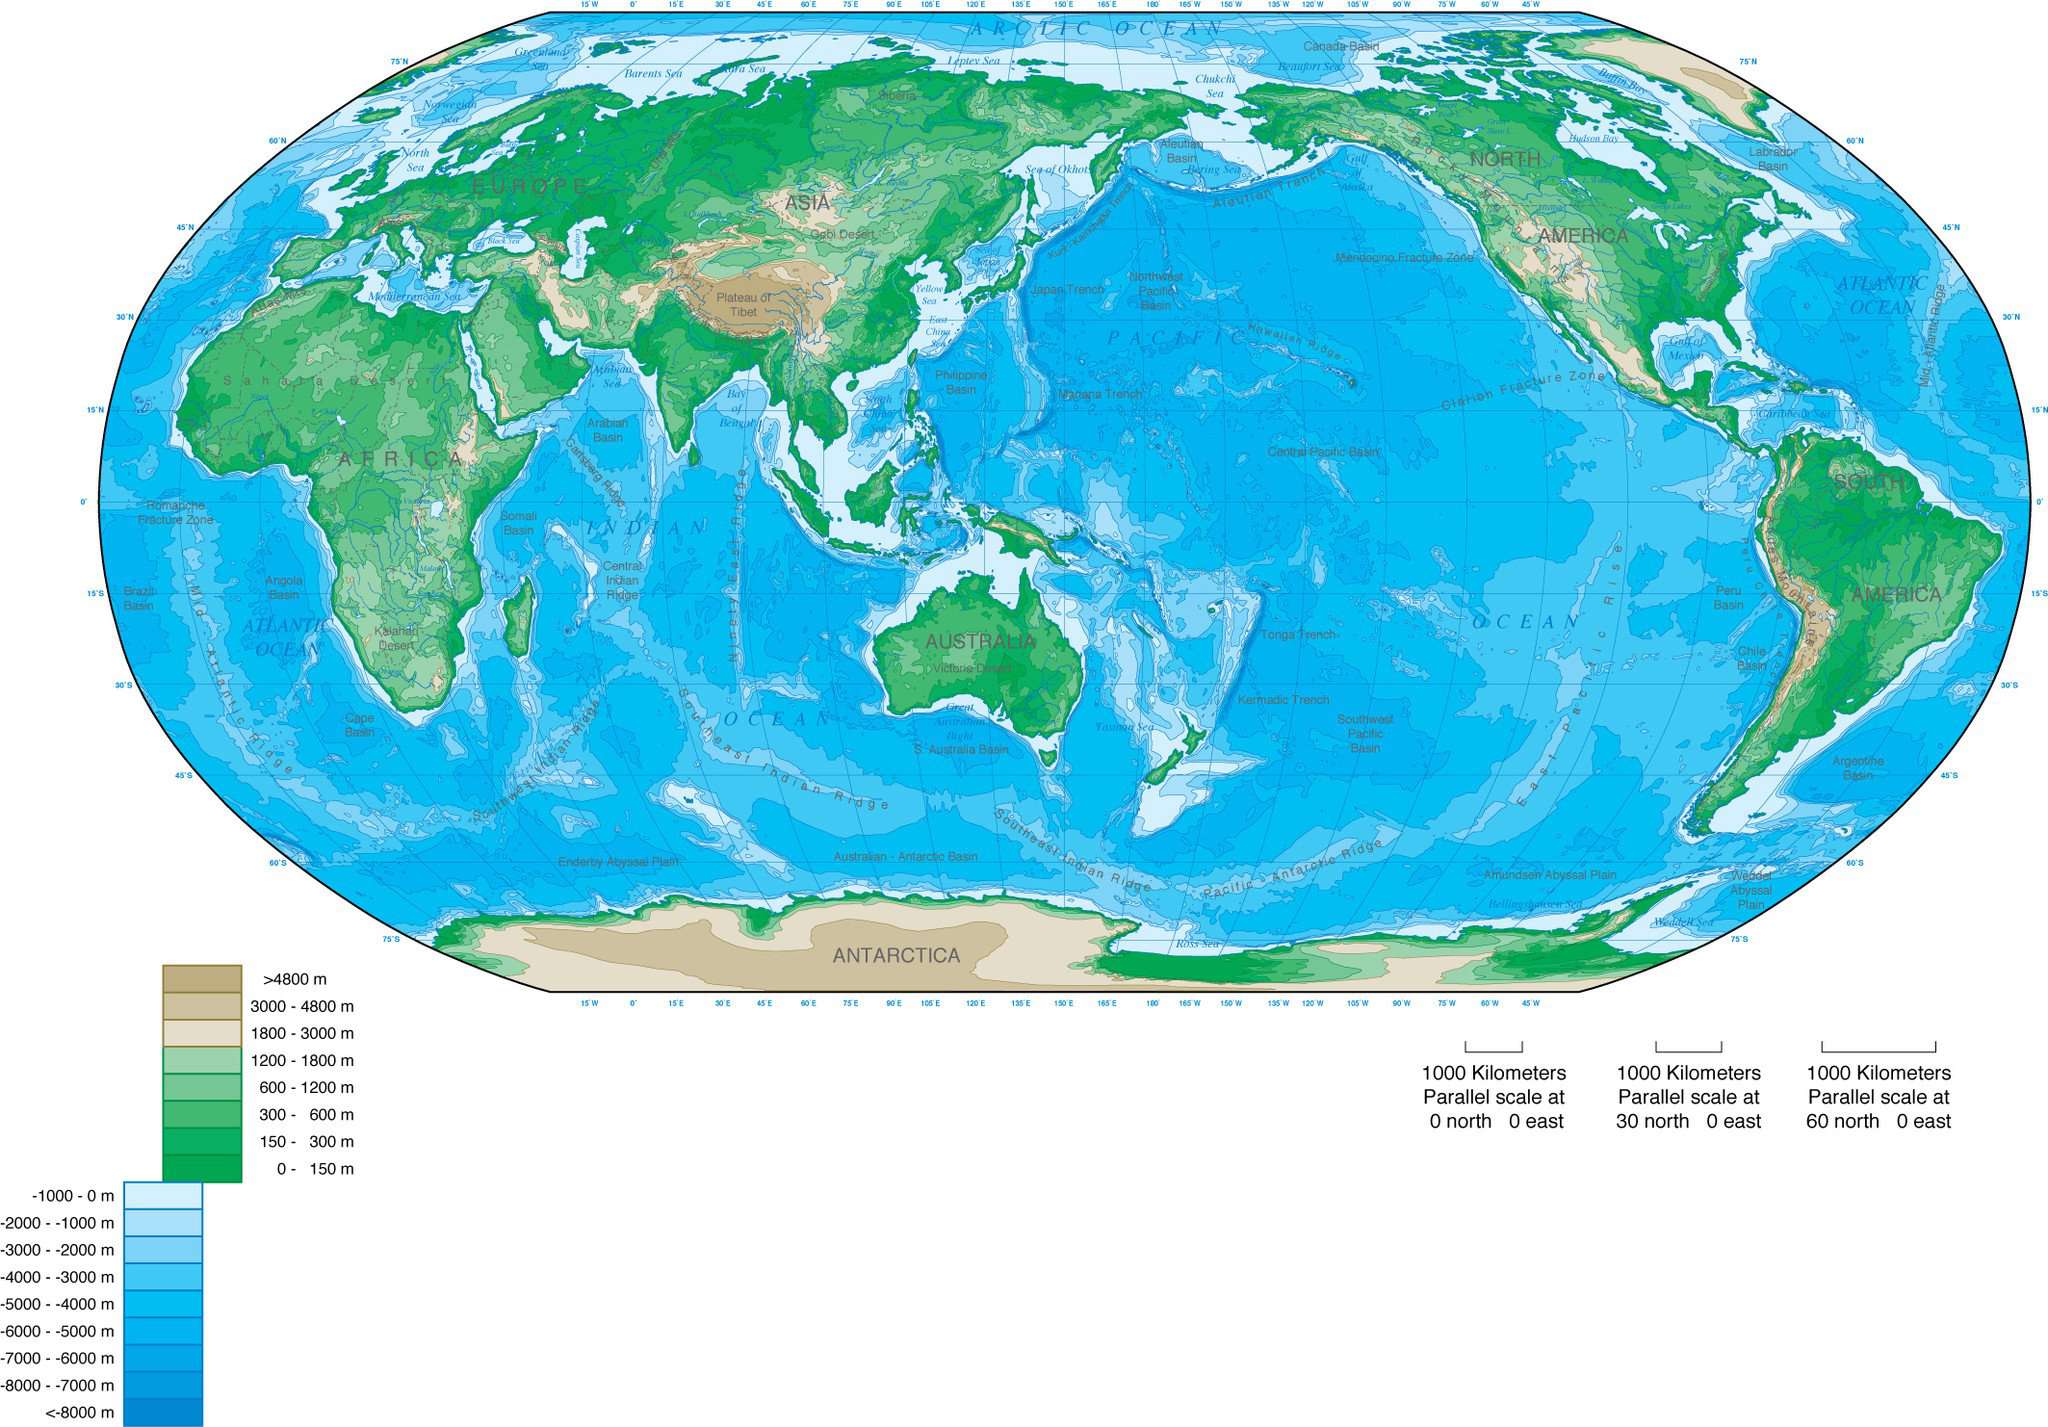 Adobe Illustrator Vector Format World Map With Contours Robinson